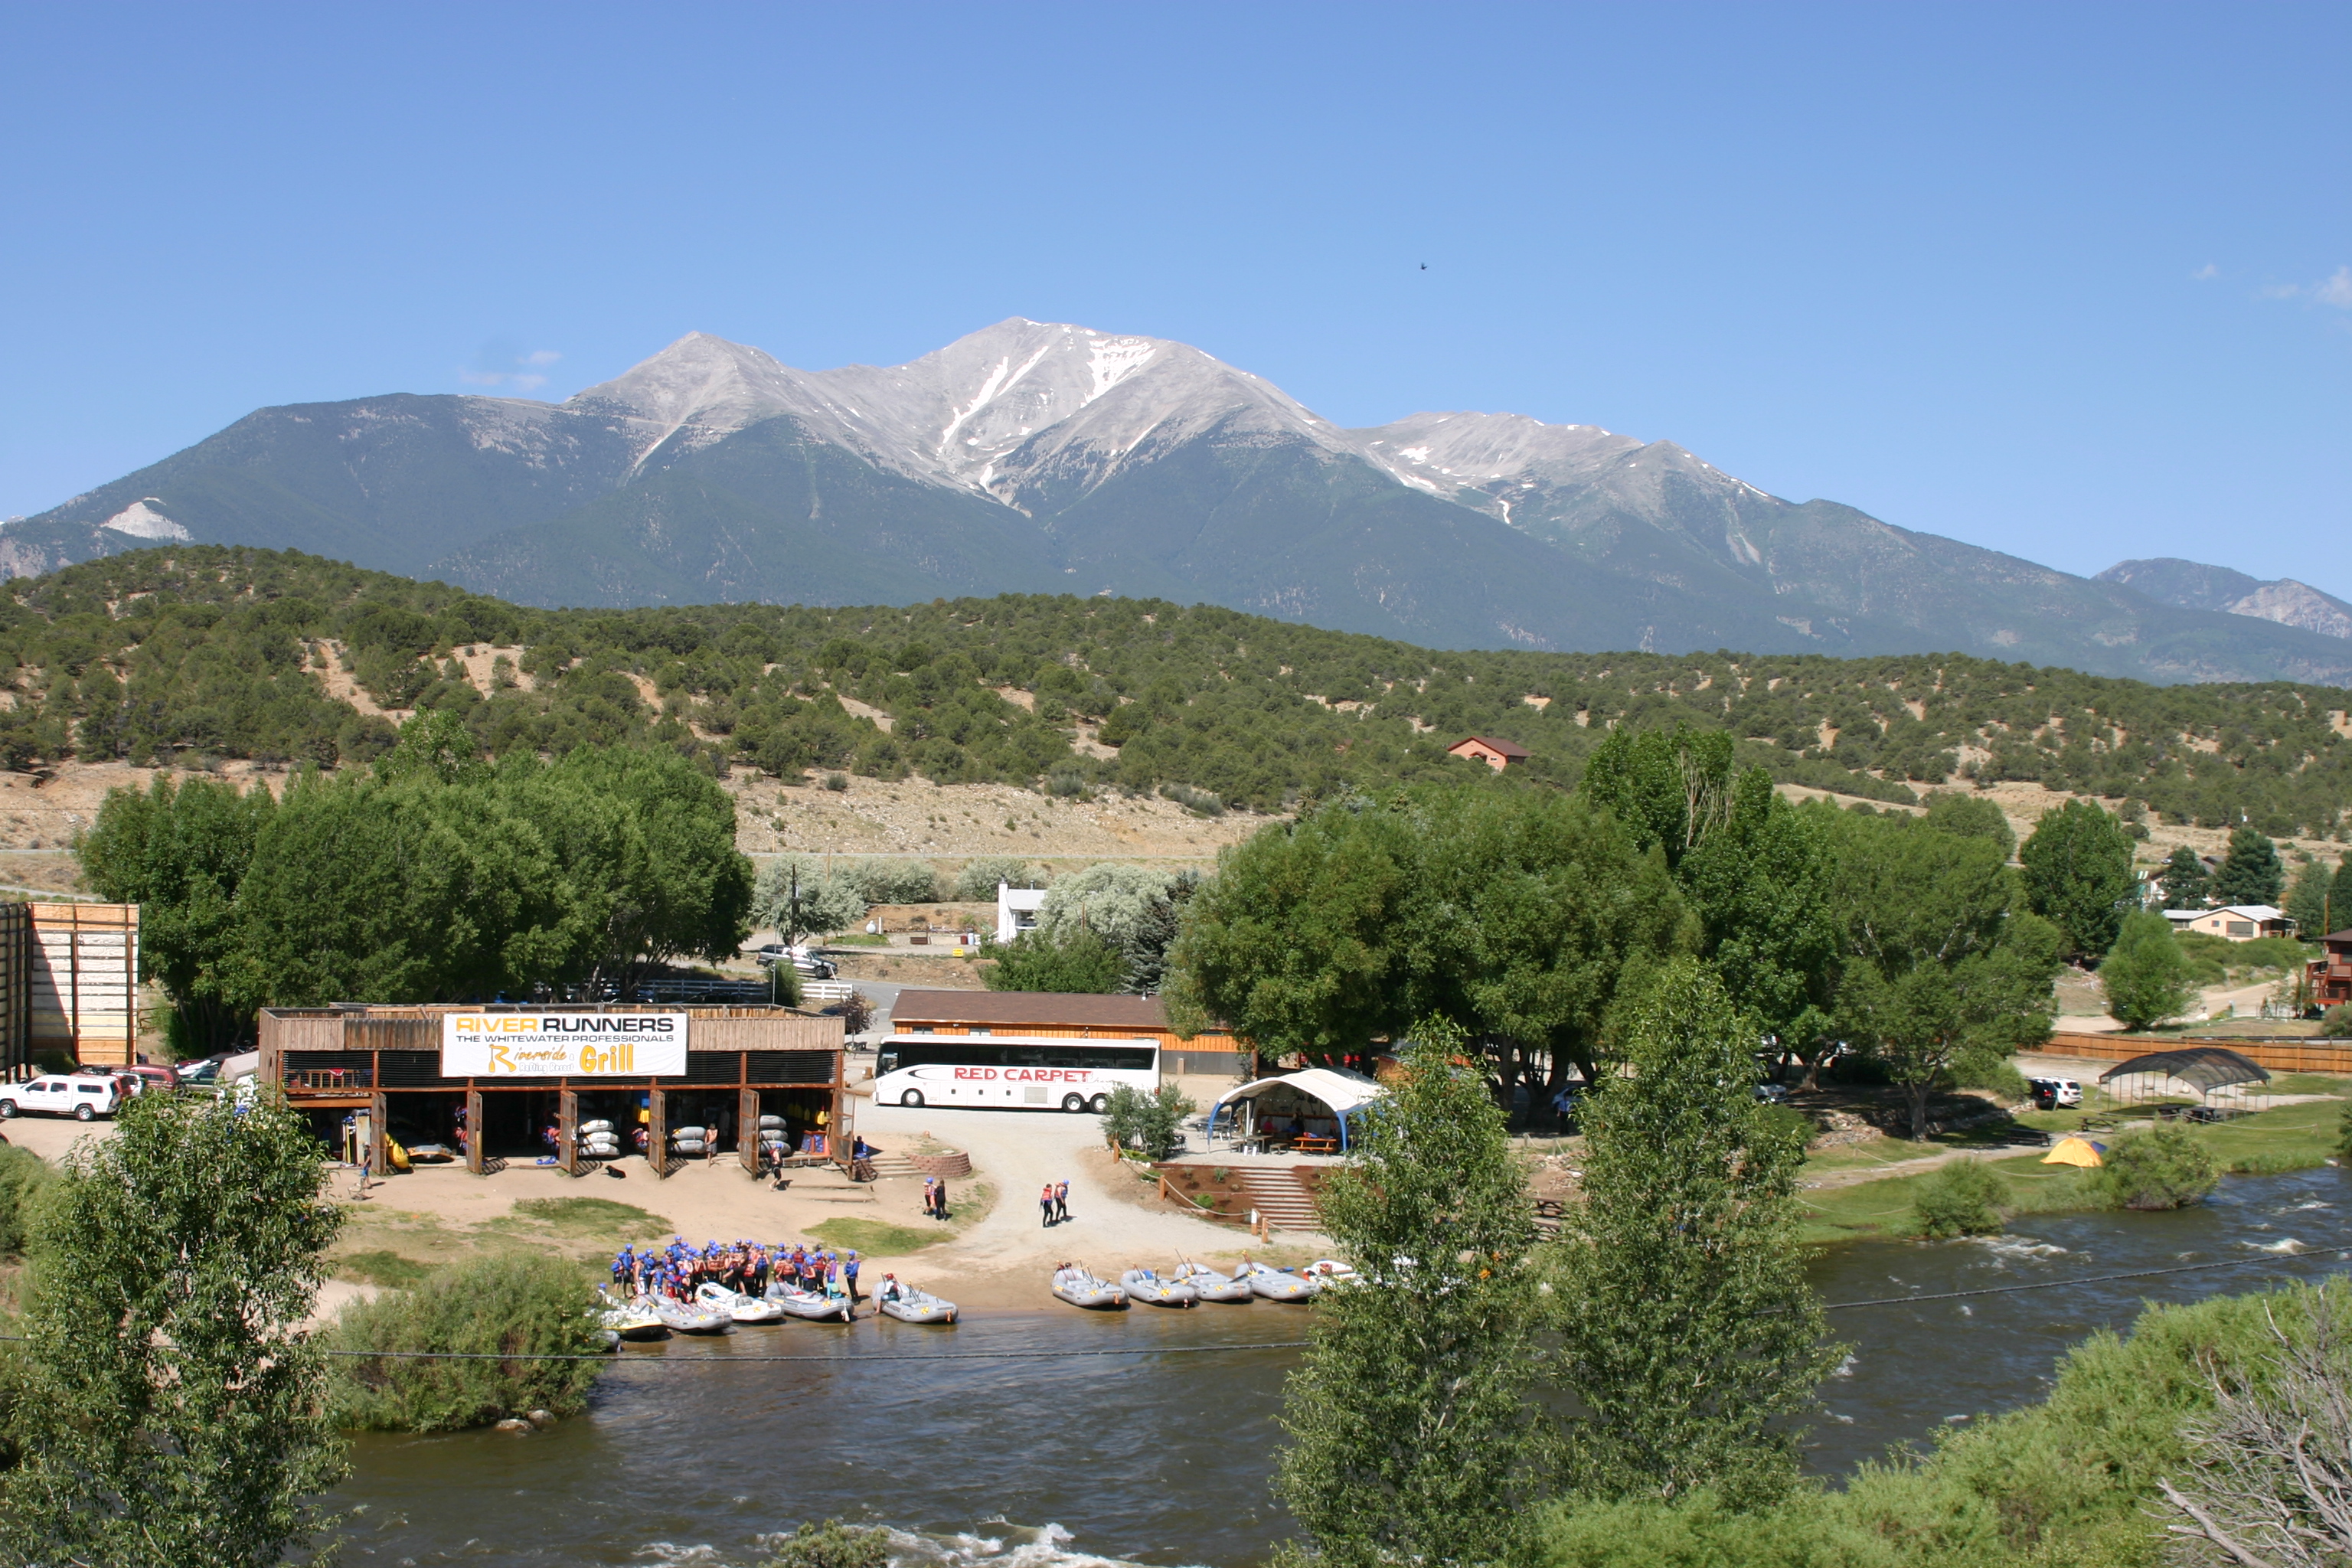 The River Runners Riverside Rafting Resort is six miles south of Buena Vista, Colo.